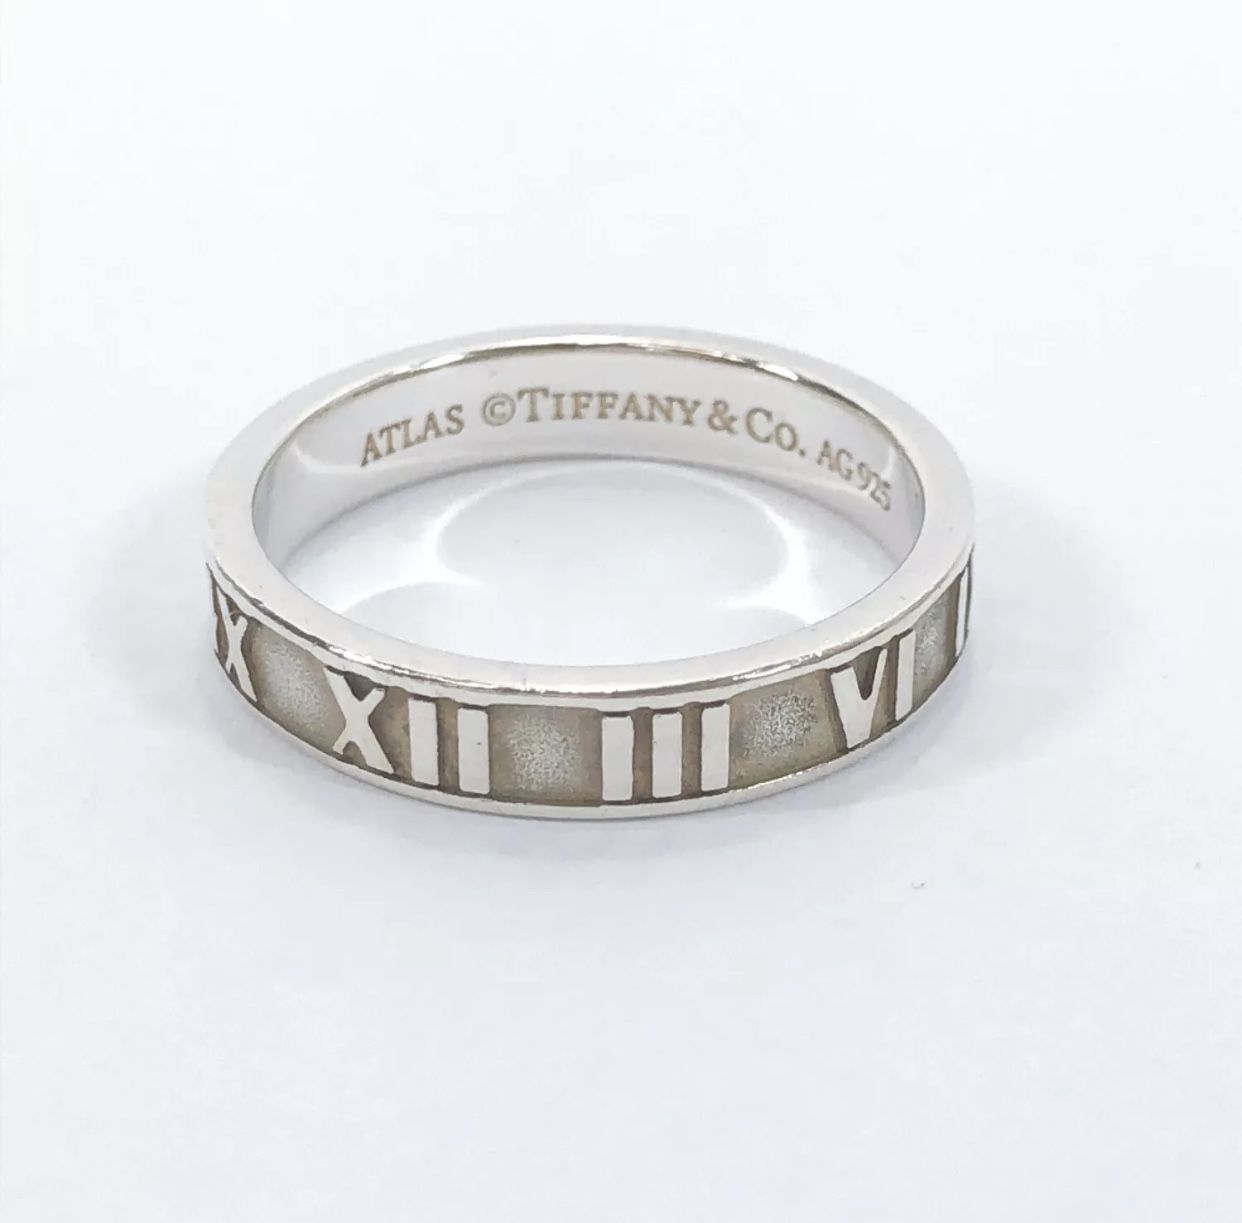 Tiffany & co ring sterling silver